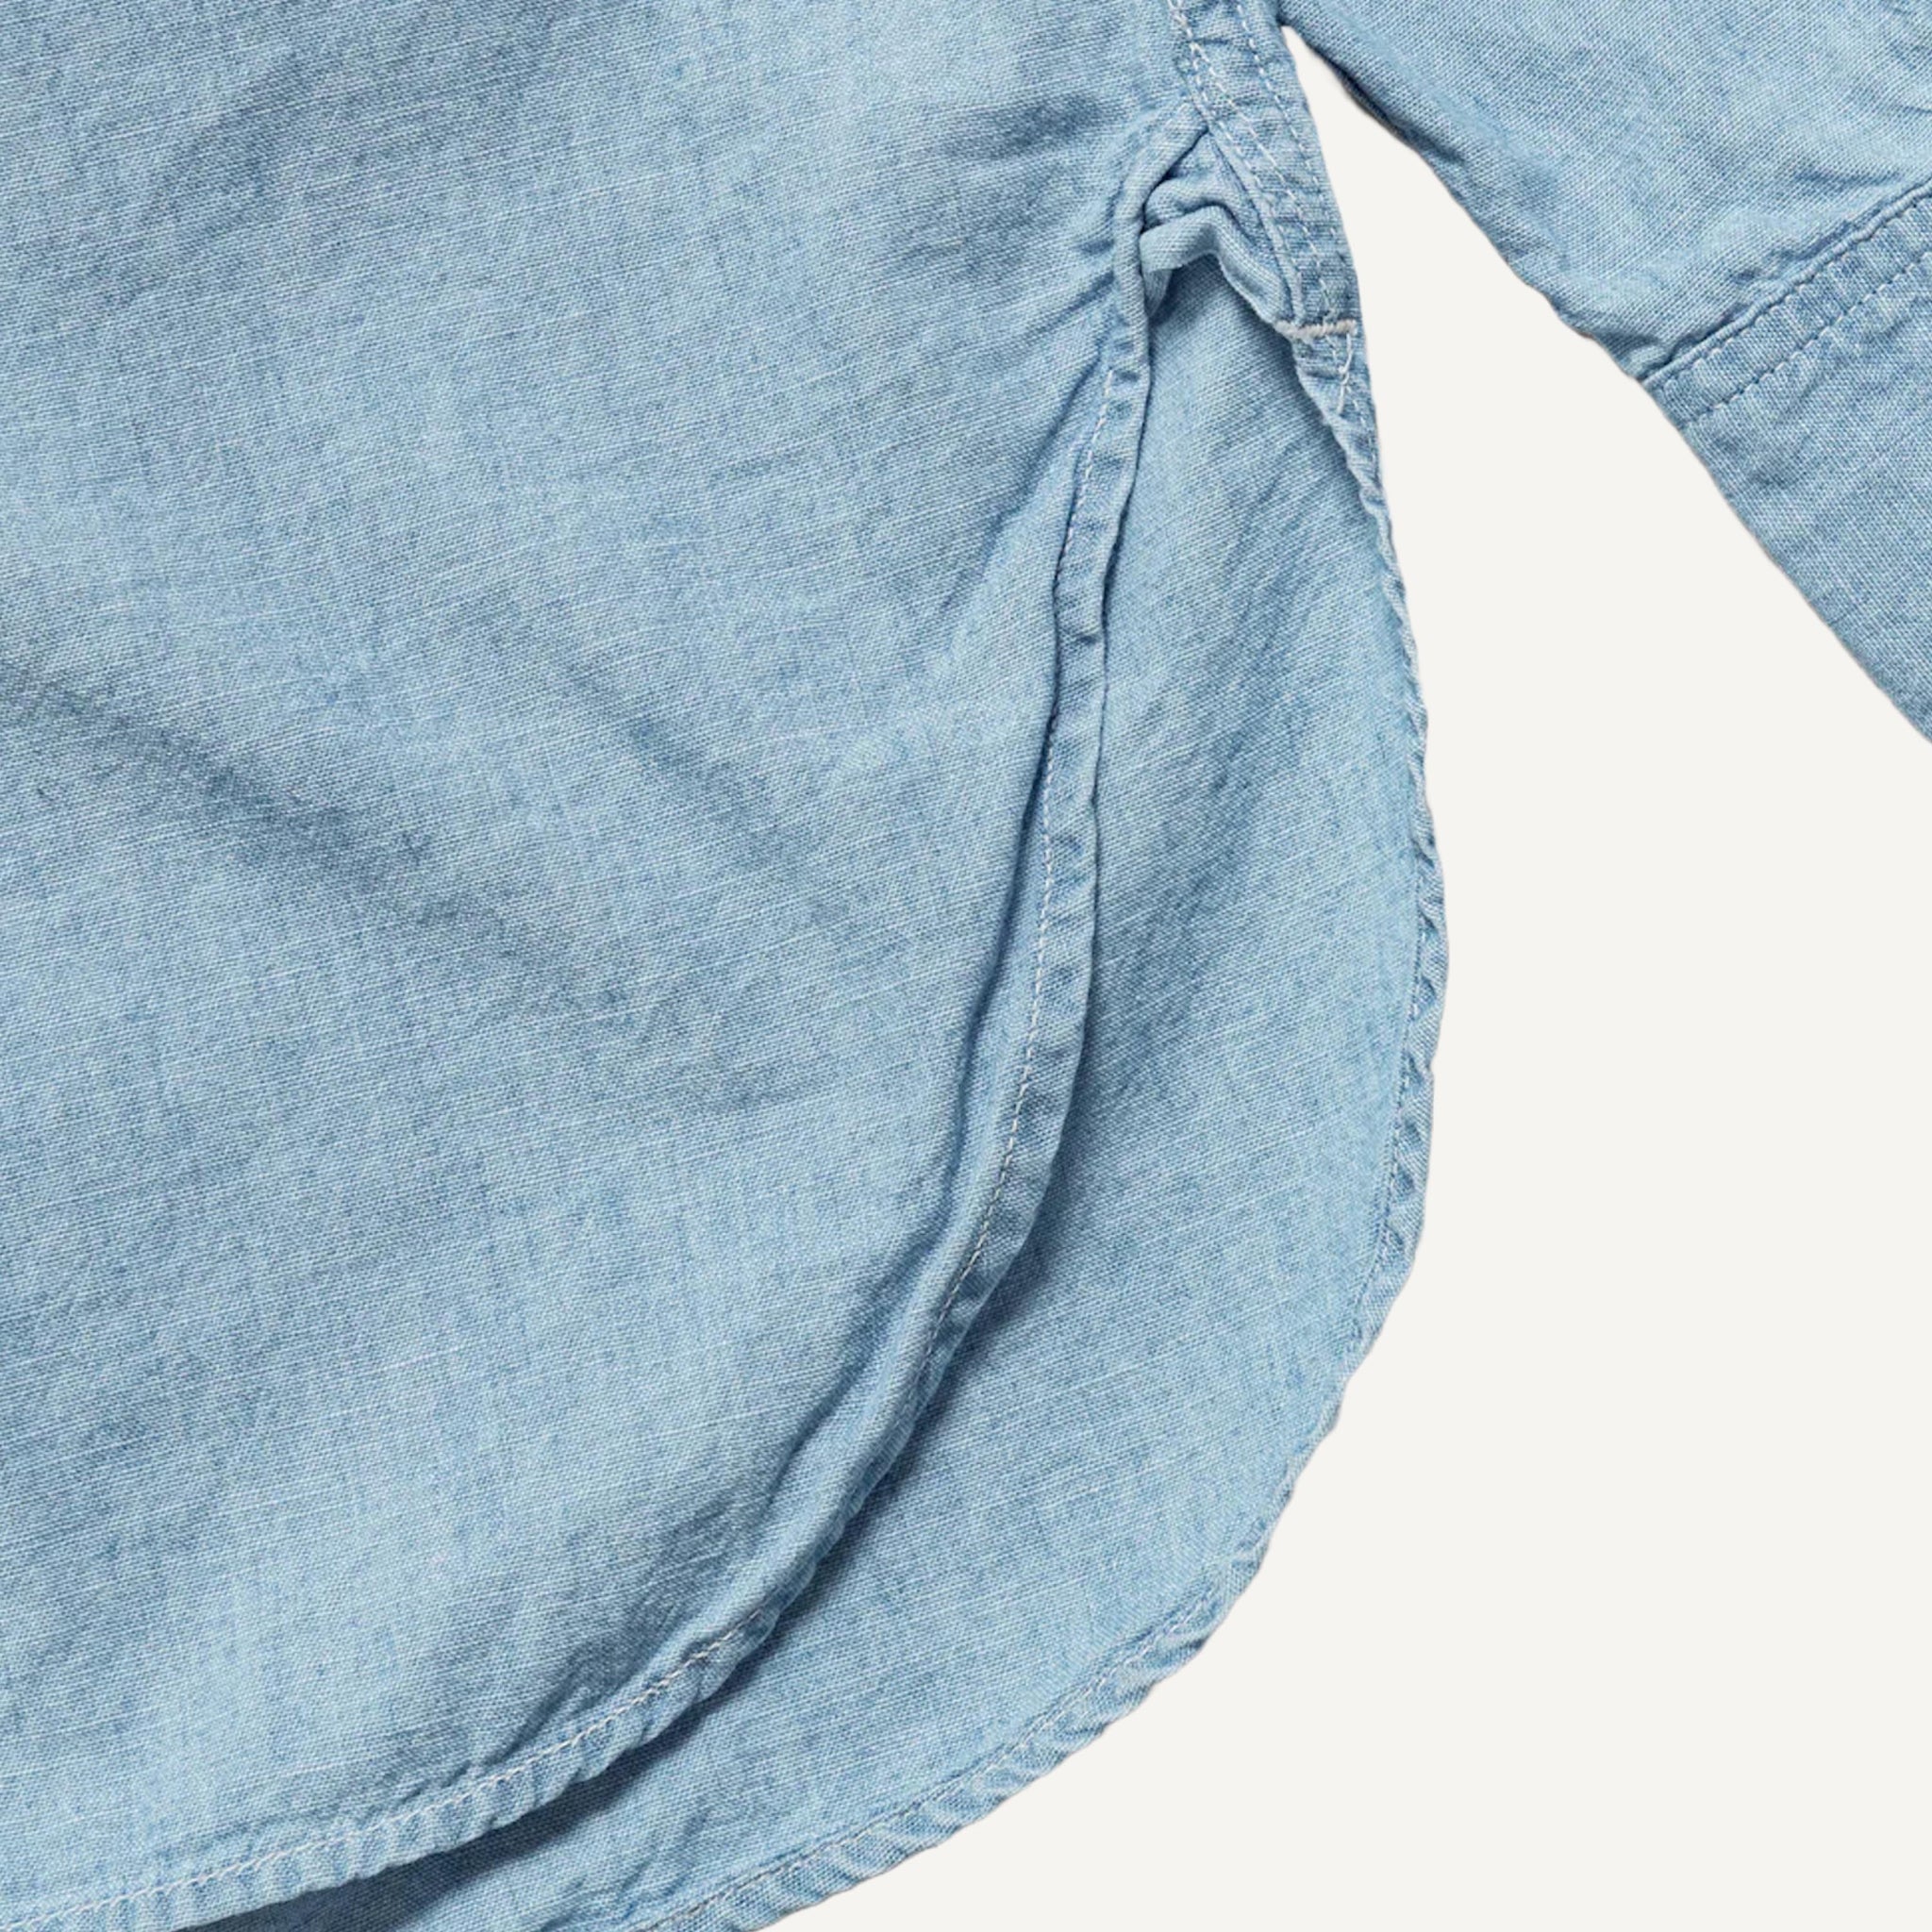 ORSLOW BLEACHED CHAMBRAY WORKSHIRT